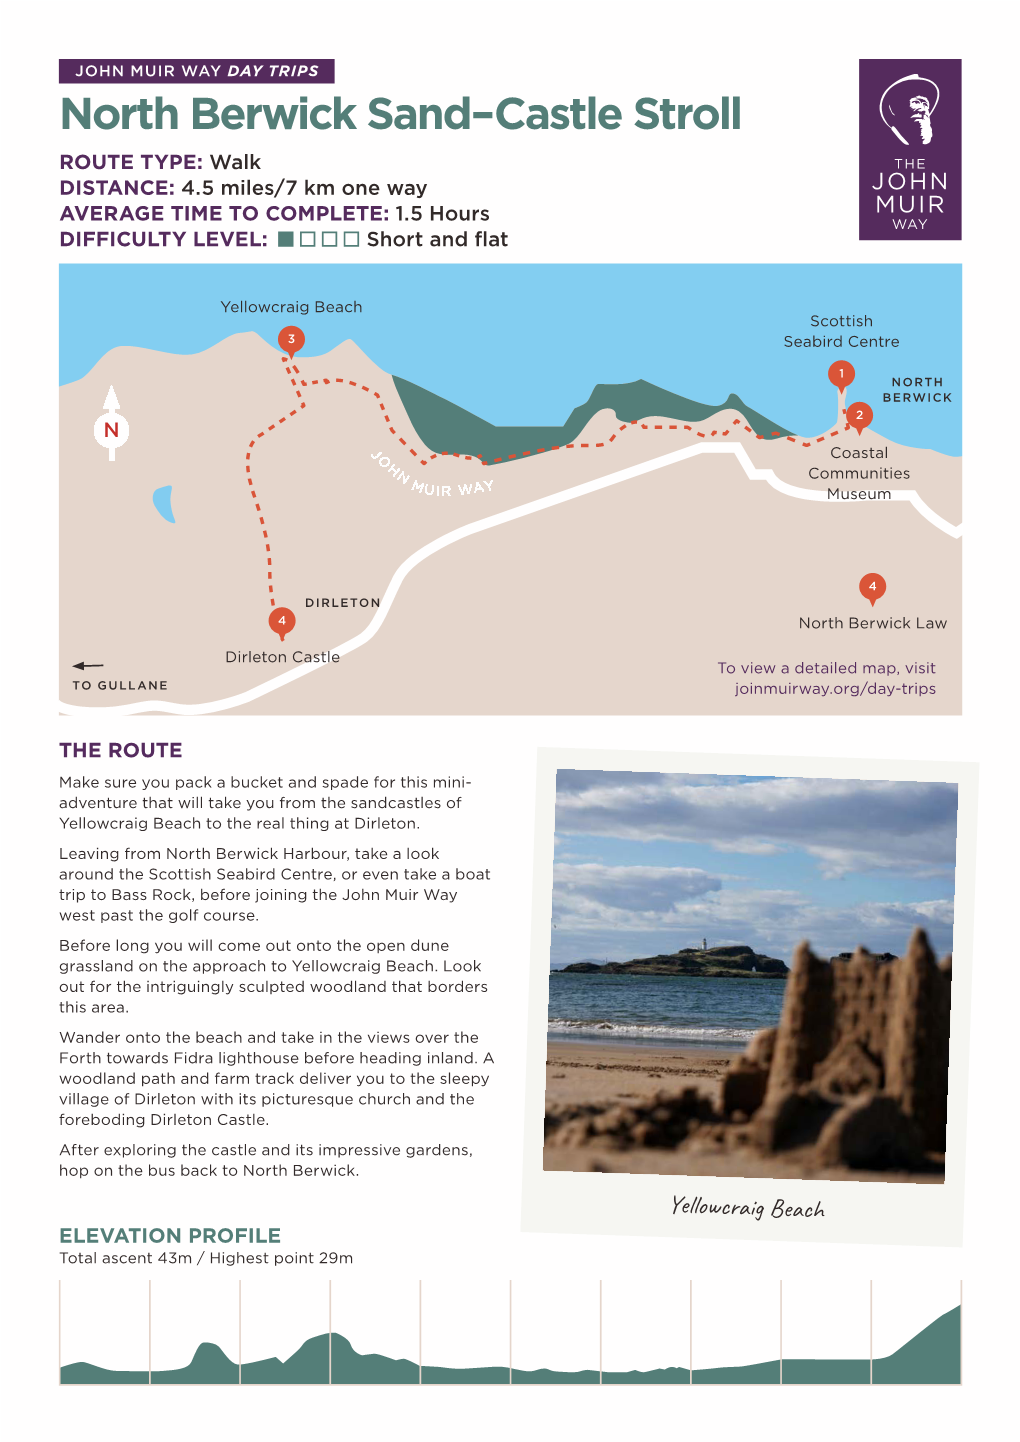 North Berwick Sand–Castle Stroll ROUTE TYPE: Walk DISTANCE: 4.5 Miles/7 Km One Way AVERAGE TIME to COMPLETE: 1.5 Hours DIFFICULTY LEVEL: Short and Flat